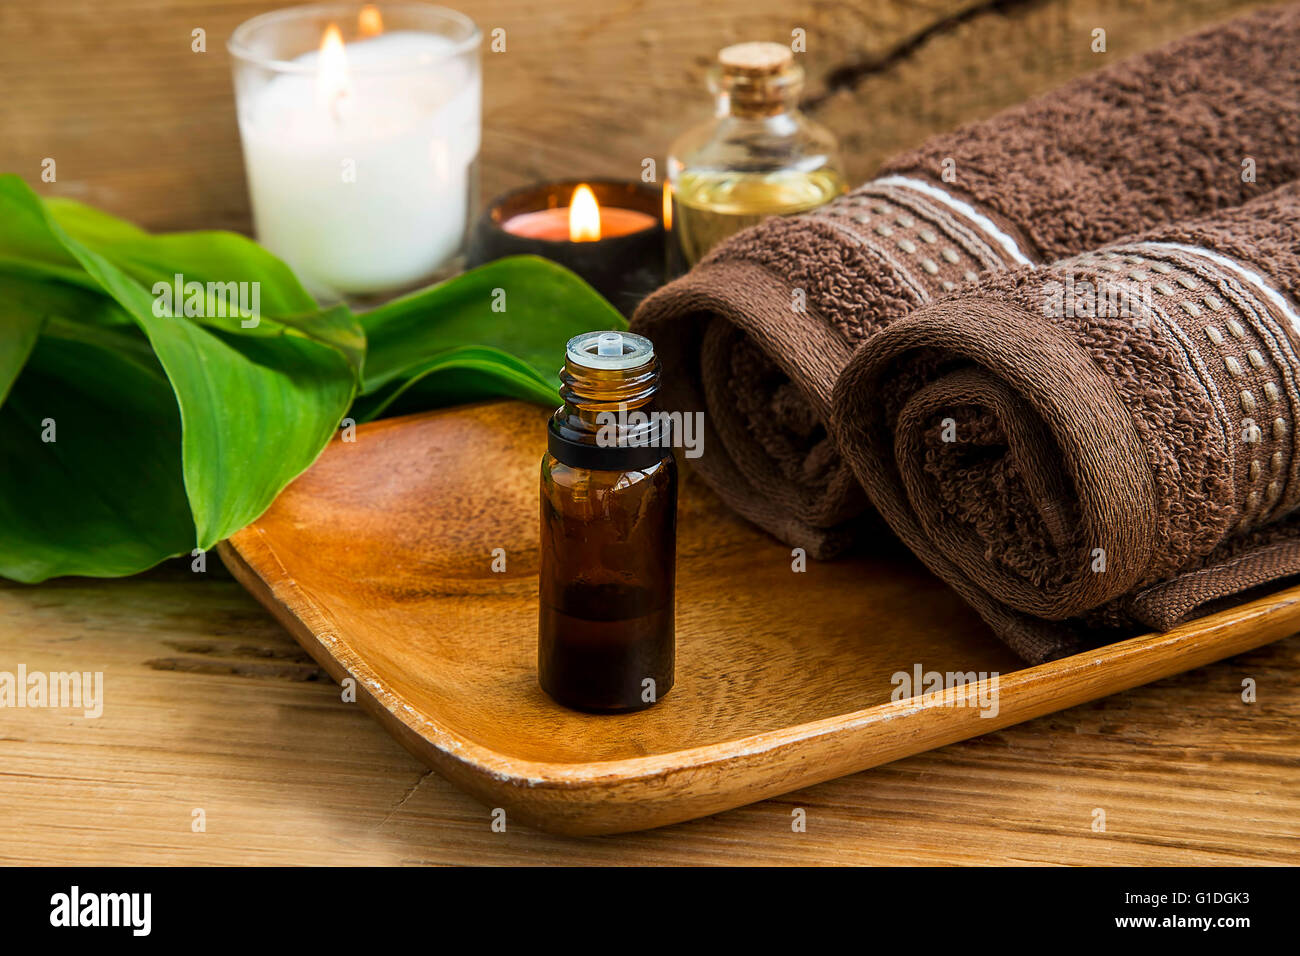 Spa treatment oil, candles and cotton towels Stock Photo